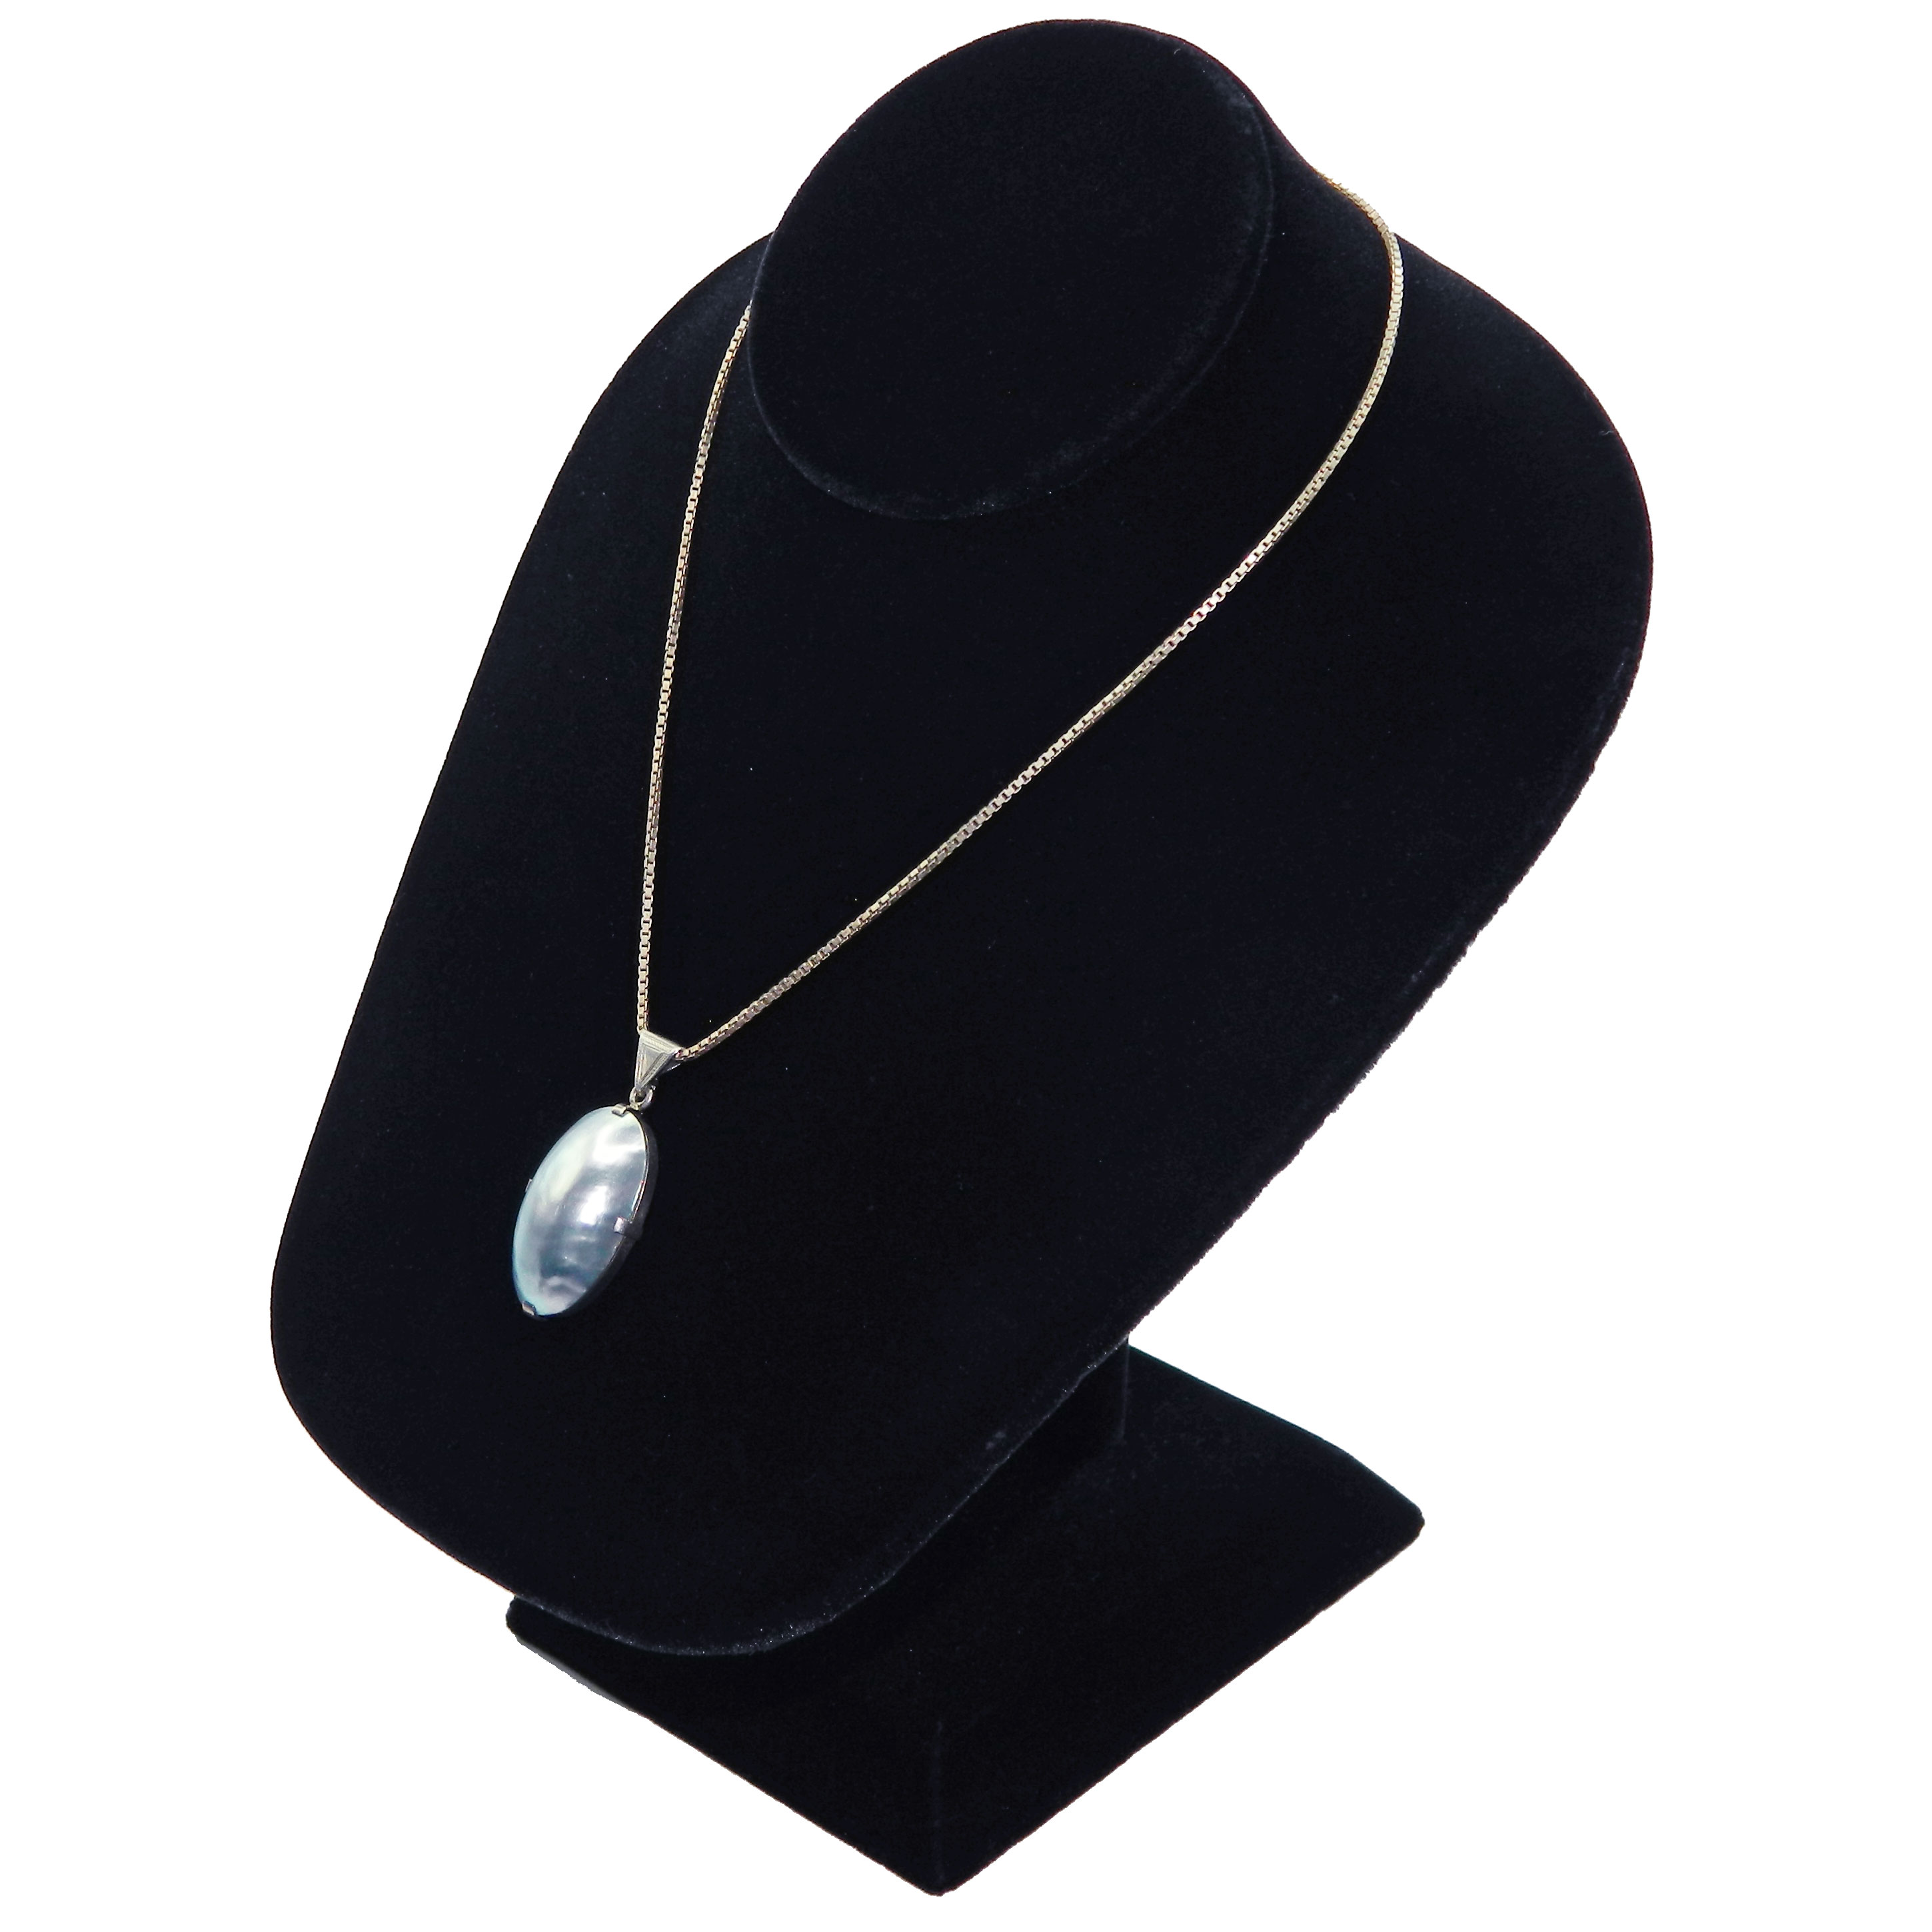 Sterling silver mother of pearl pendant necklace